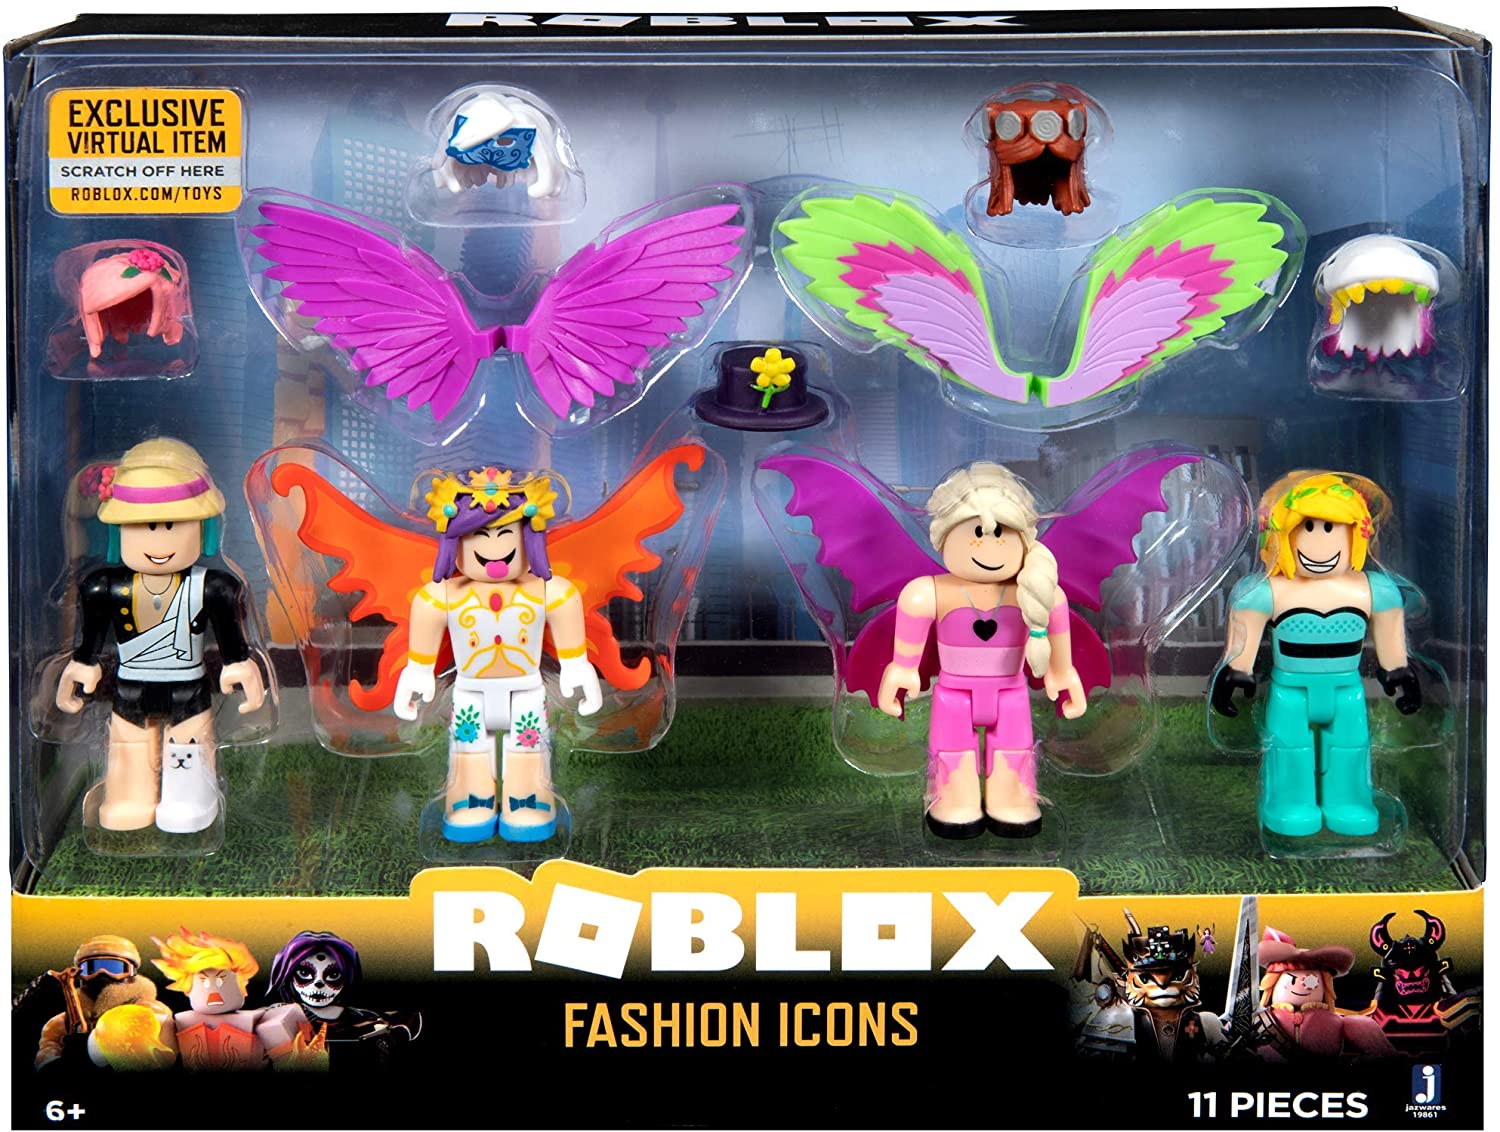 Roblox Celebrity Collection – Fashion Icons Four Figure Pack [Includes Exclusive Virtual Item]